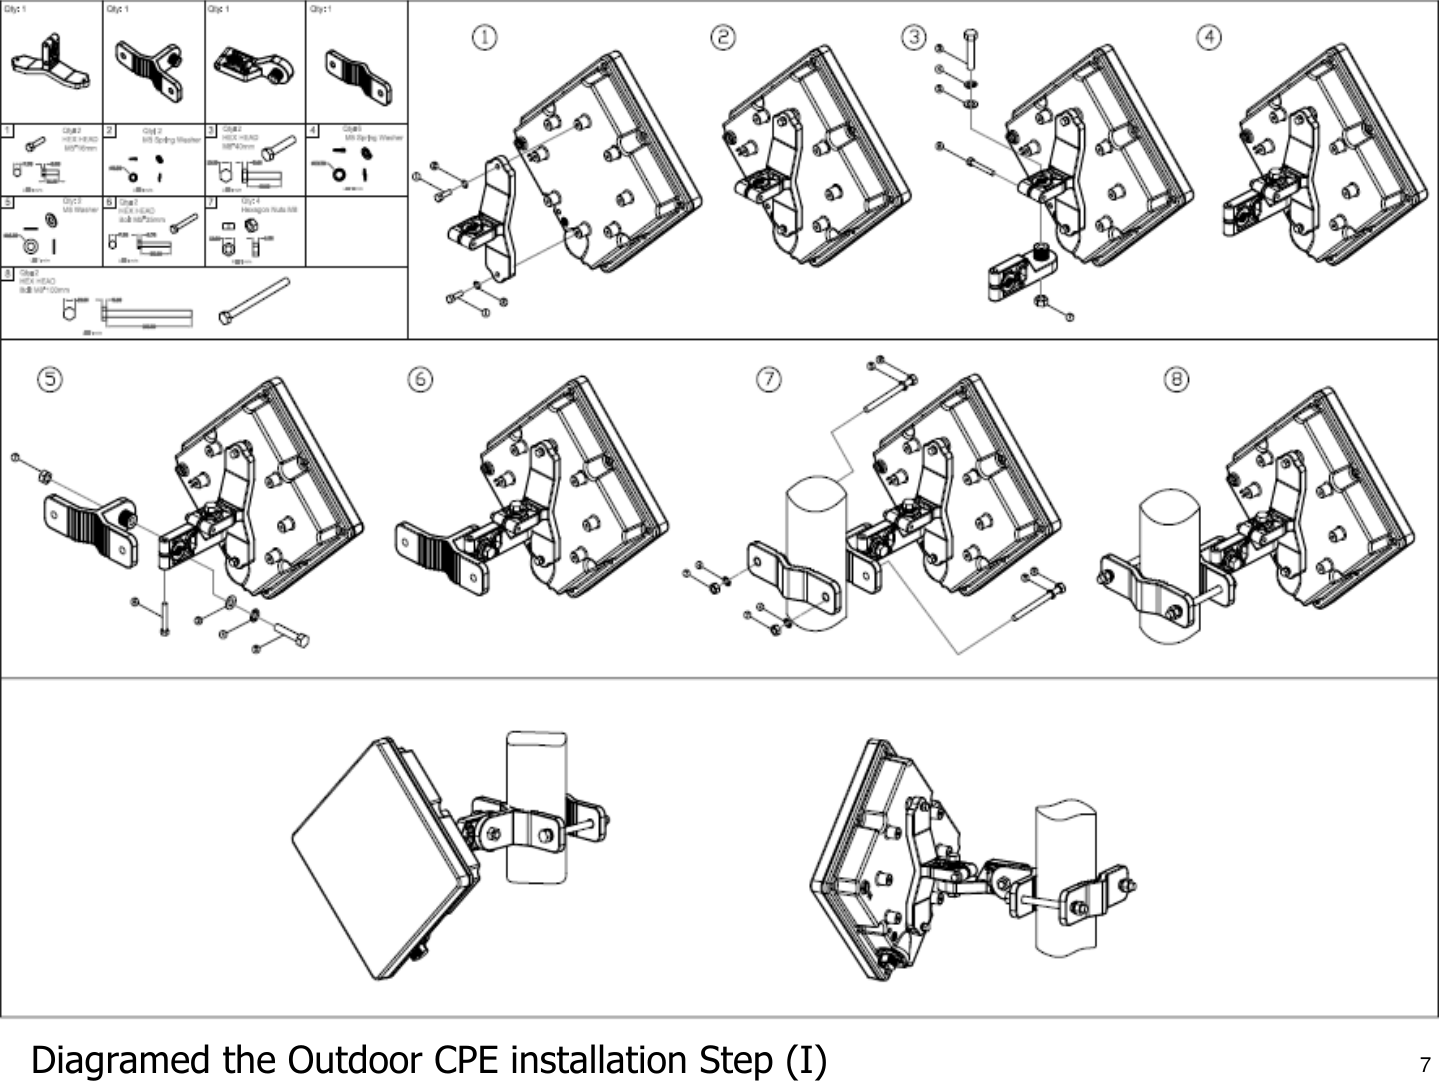 7Diagramed the Outdoor CPE installation Step (I)